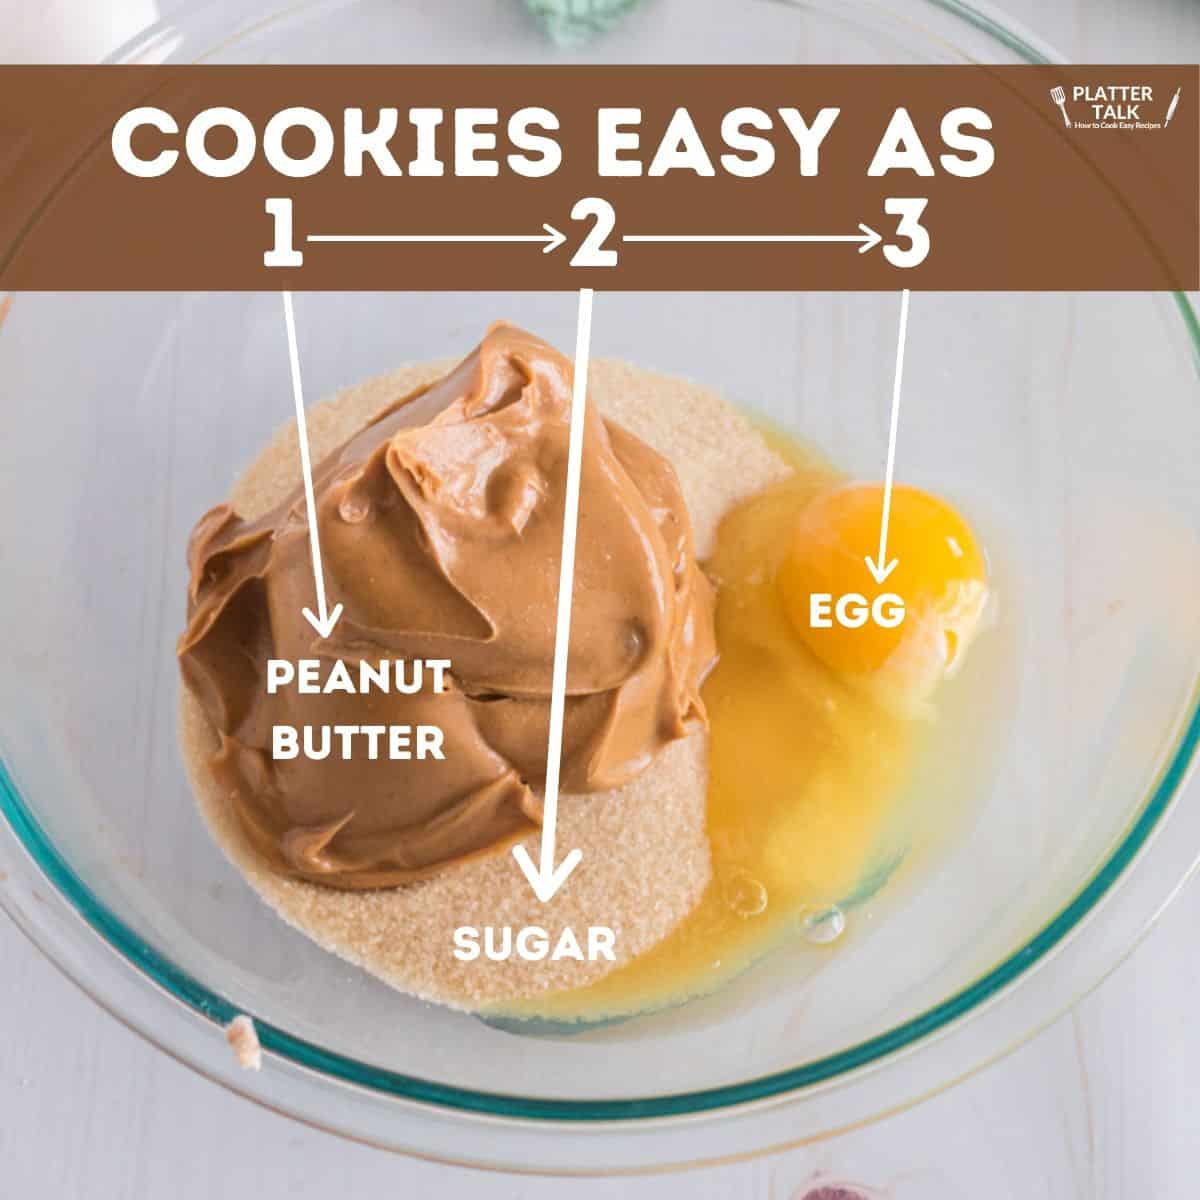 A mixing bowl of peanut butter, sugar, egg.